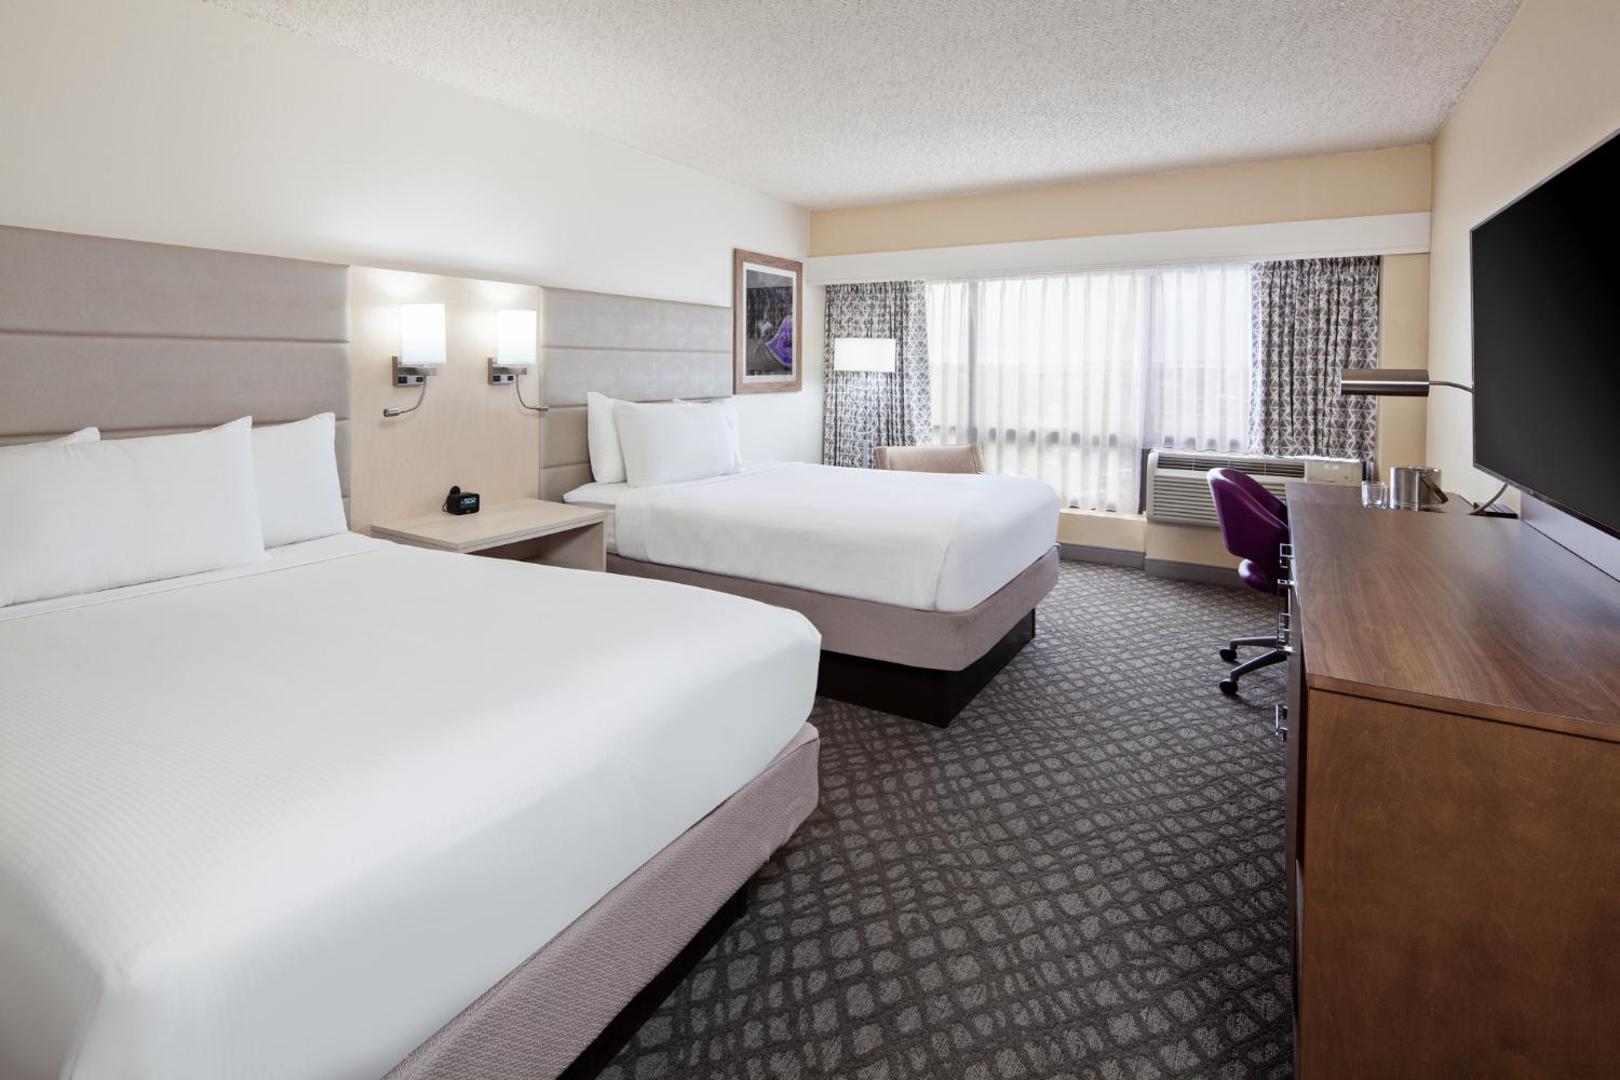 DoubleTree New Orleans Airport